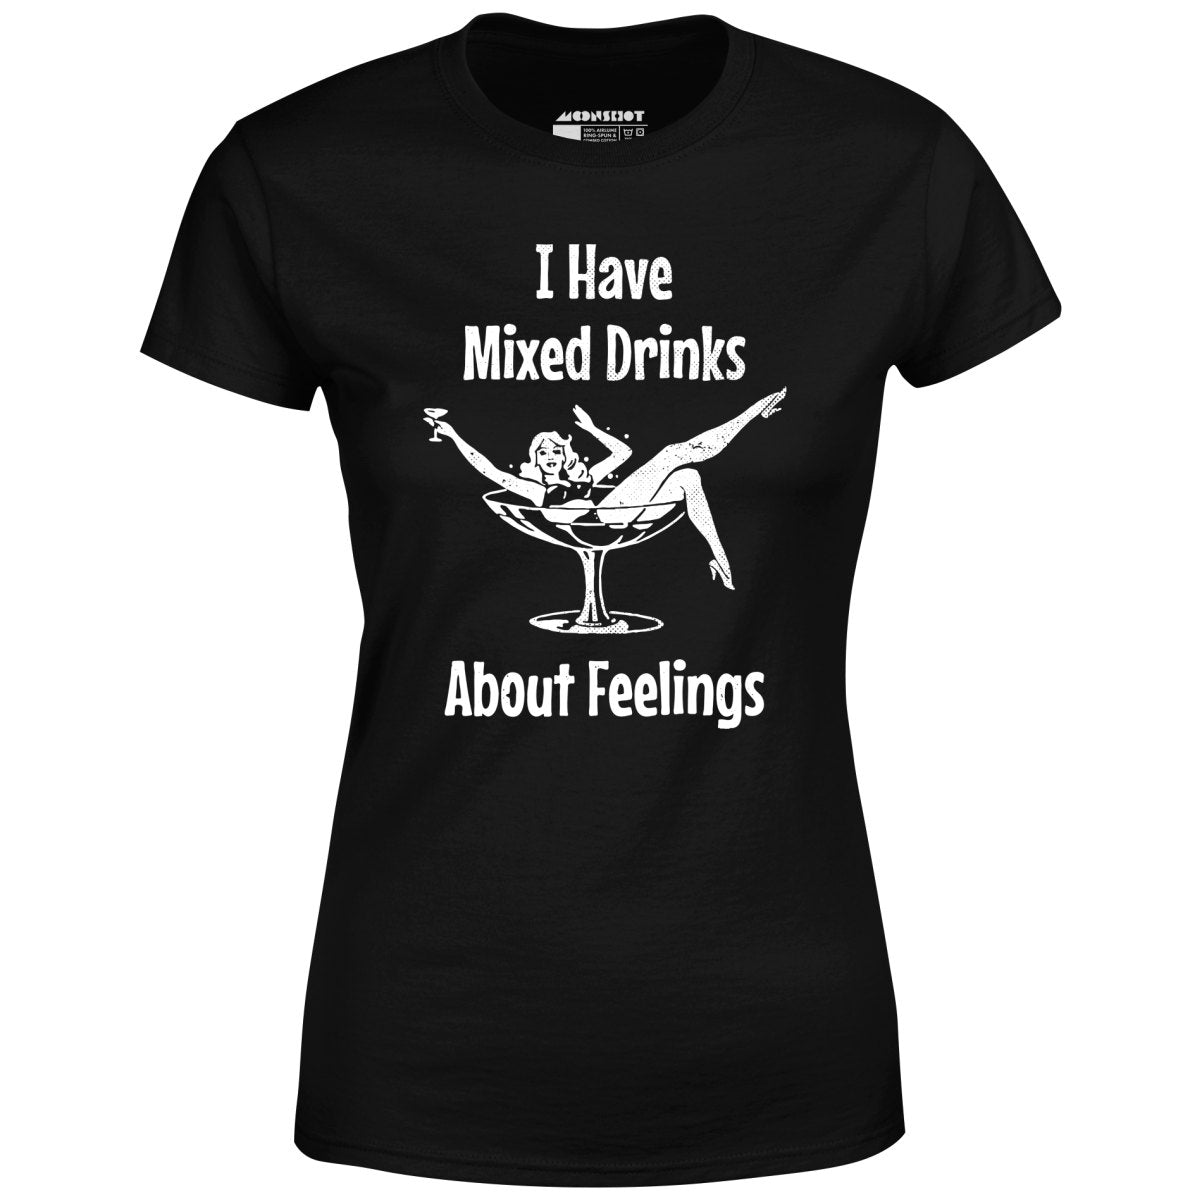 I Have Mixed Drinks About Feelings - Women's T-Shirt